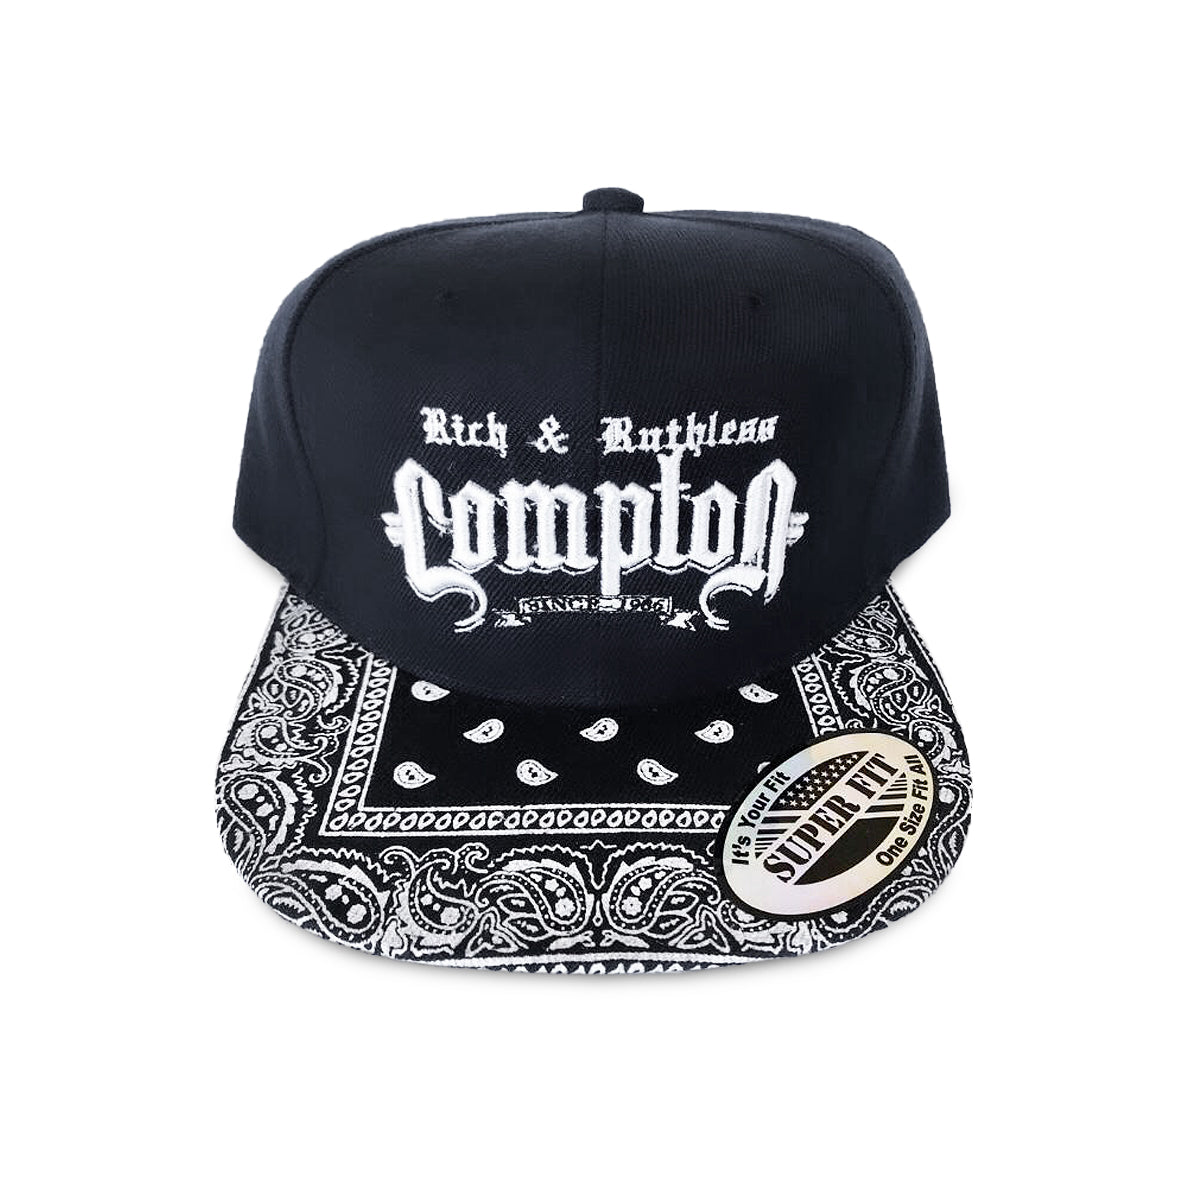 Rich & Ruthless Compton Since 1986 (Snapback Black Paisley)